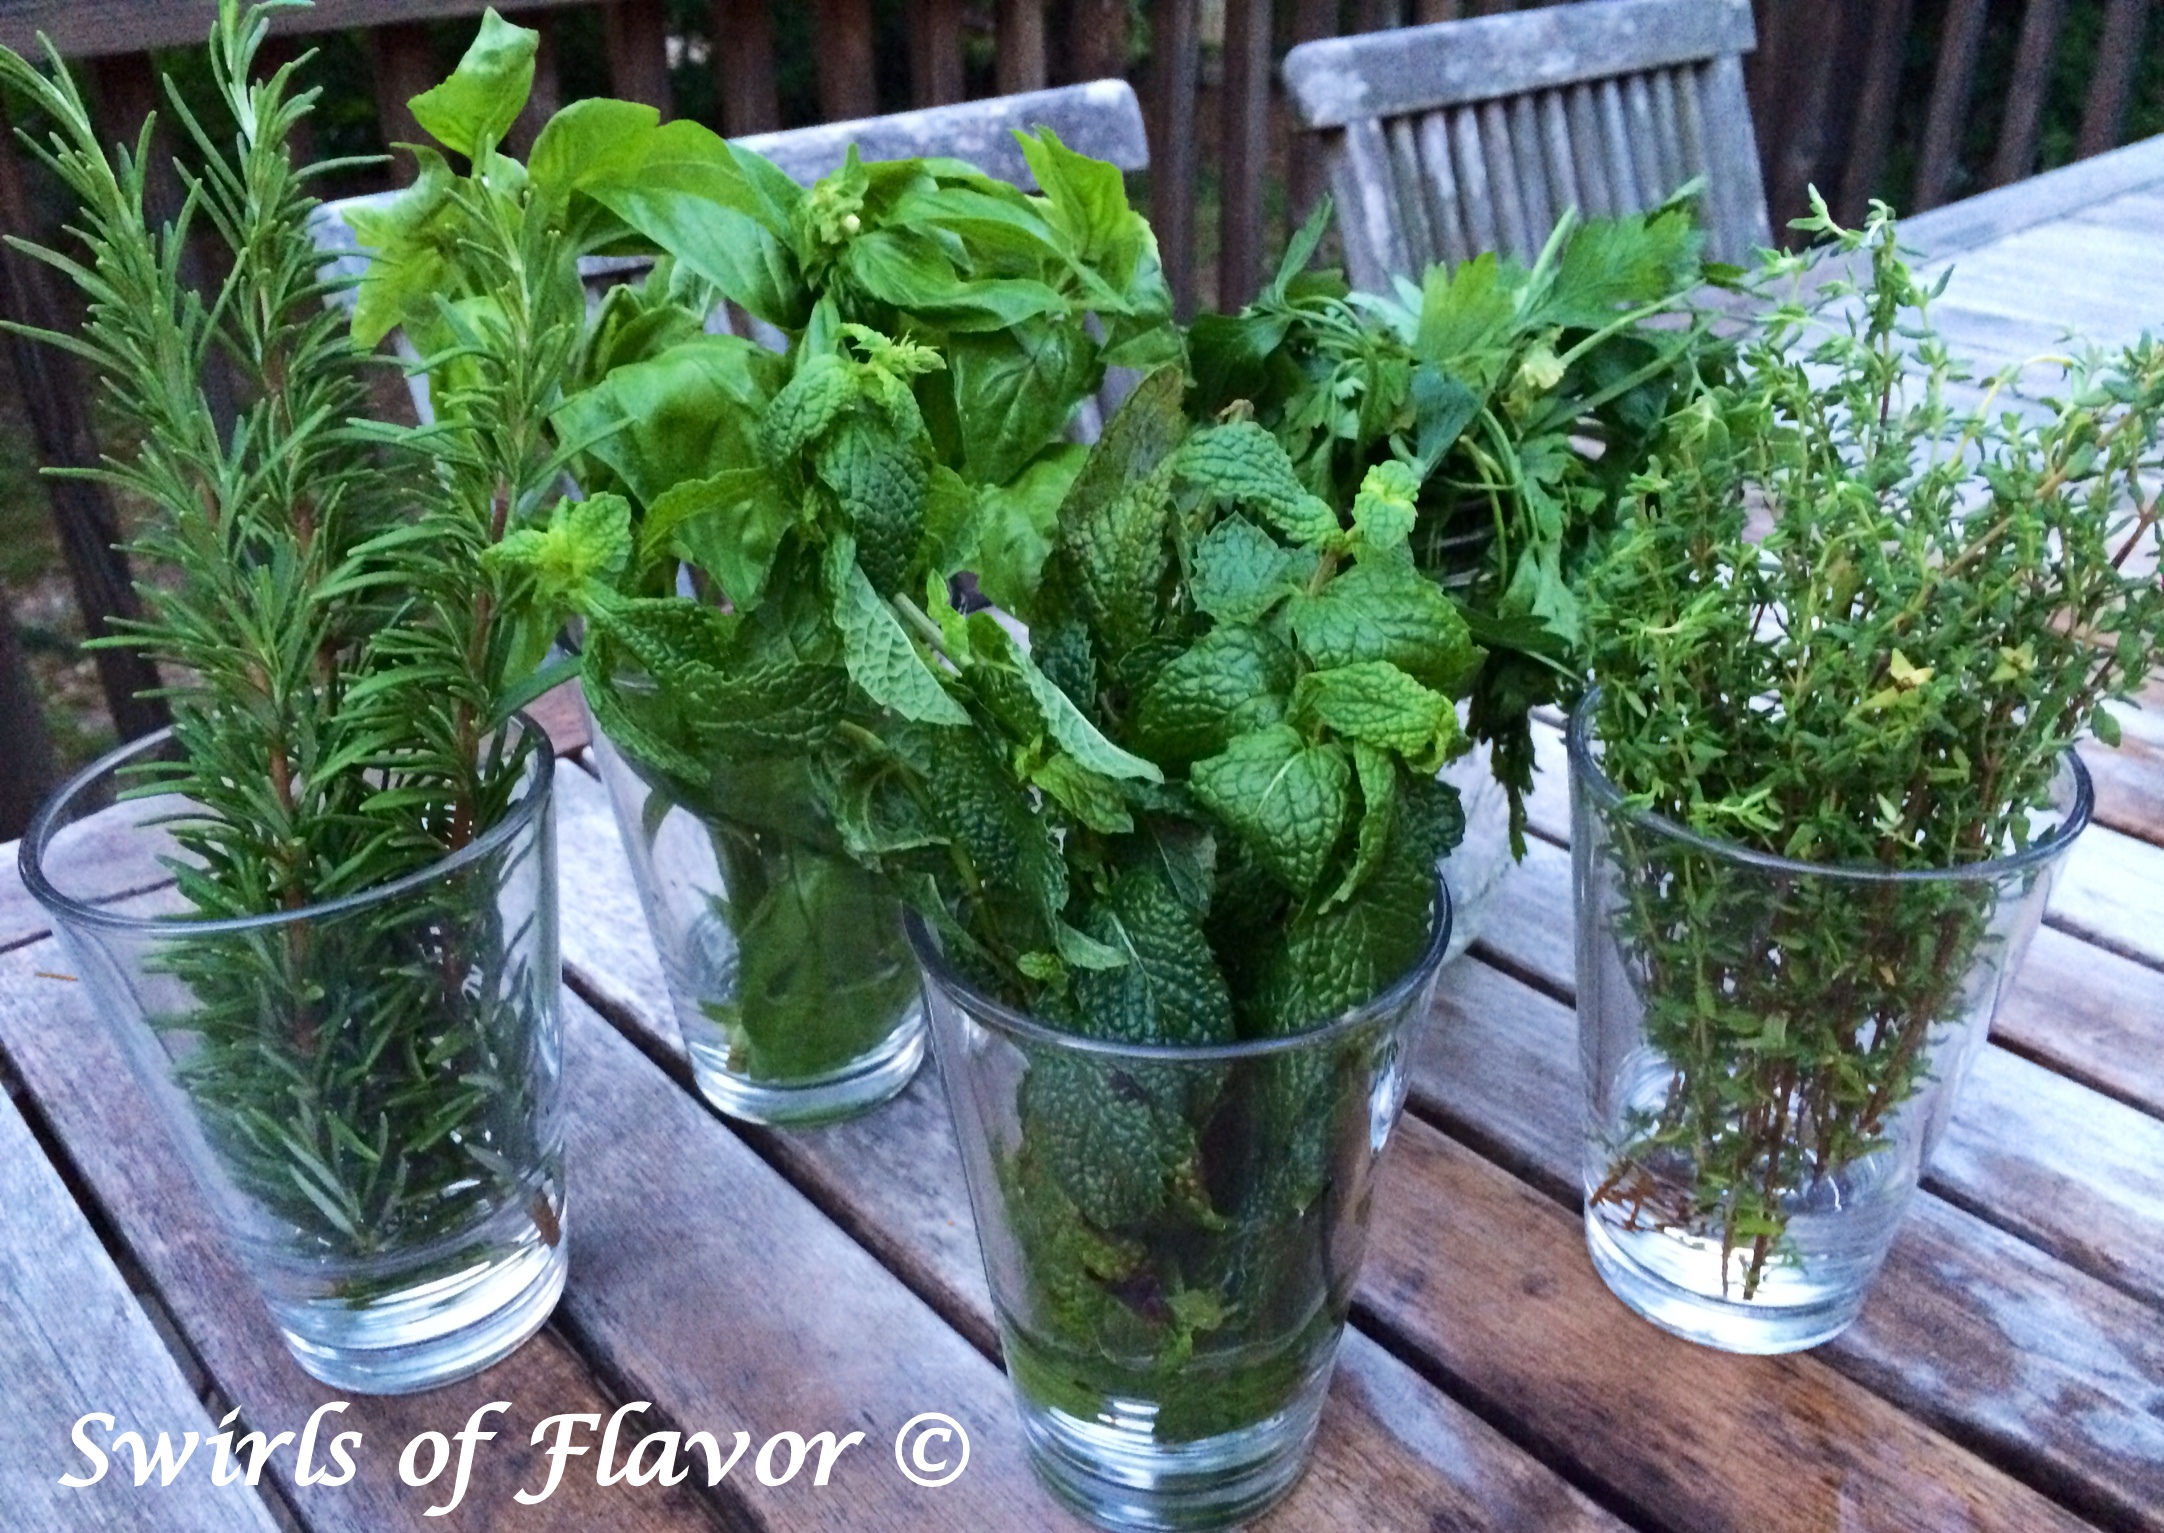 Fresh herbs in glasses on a wooden table